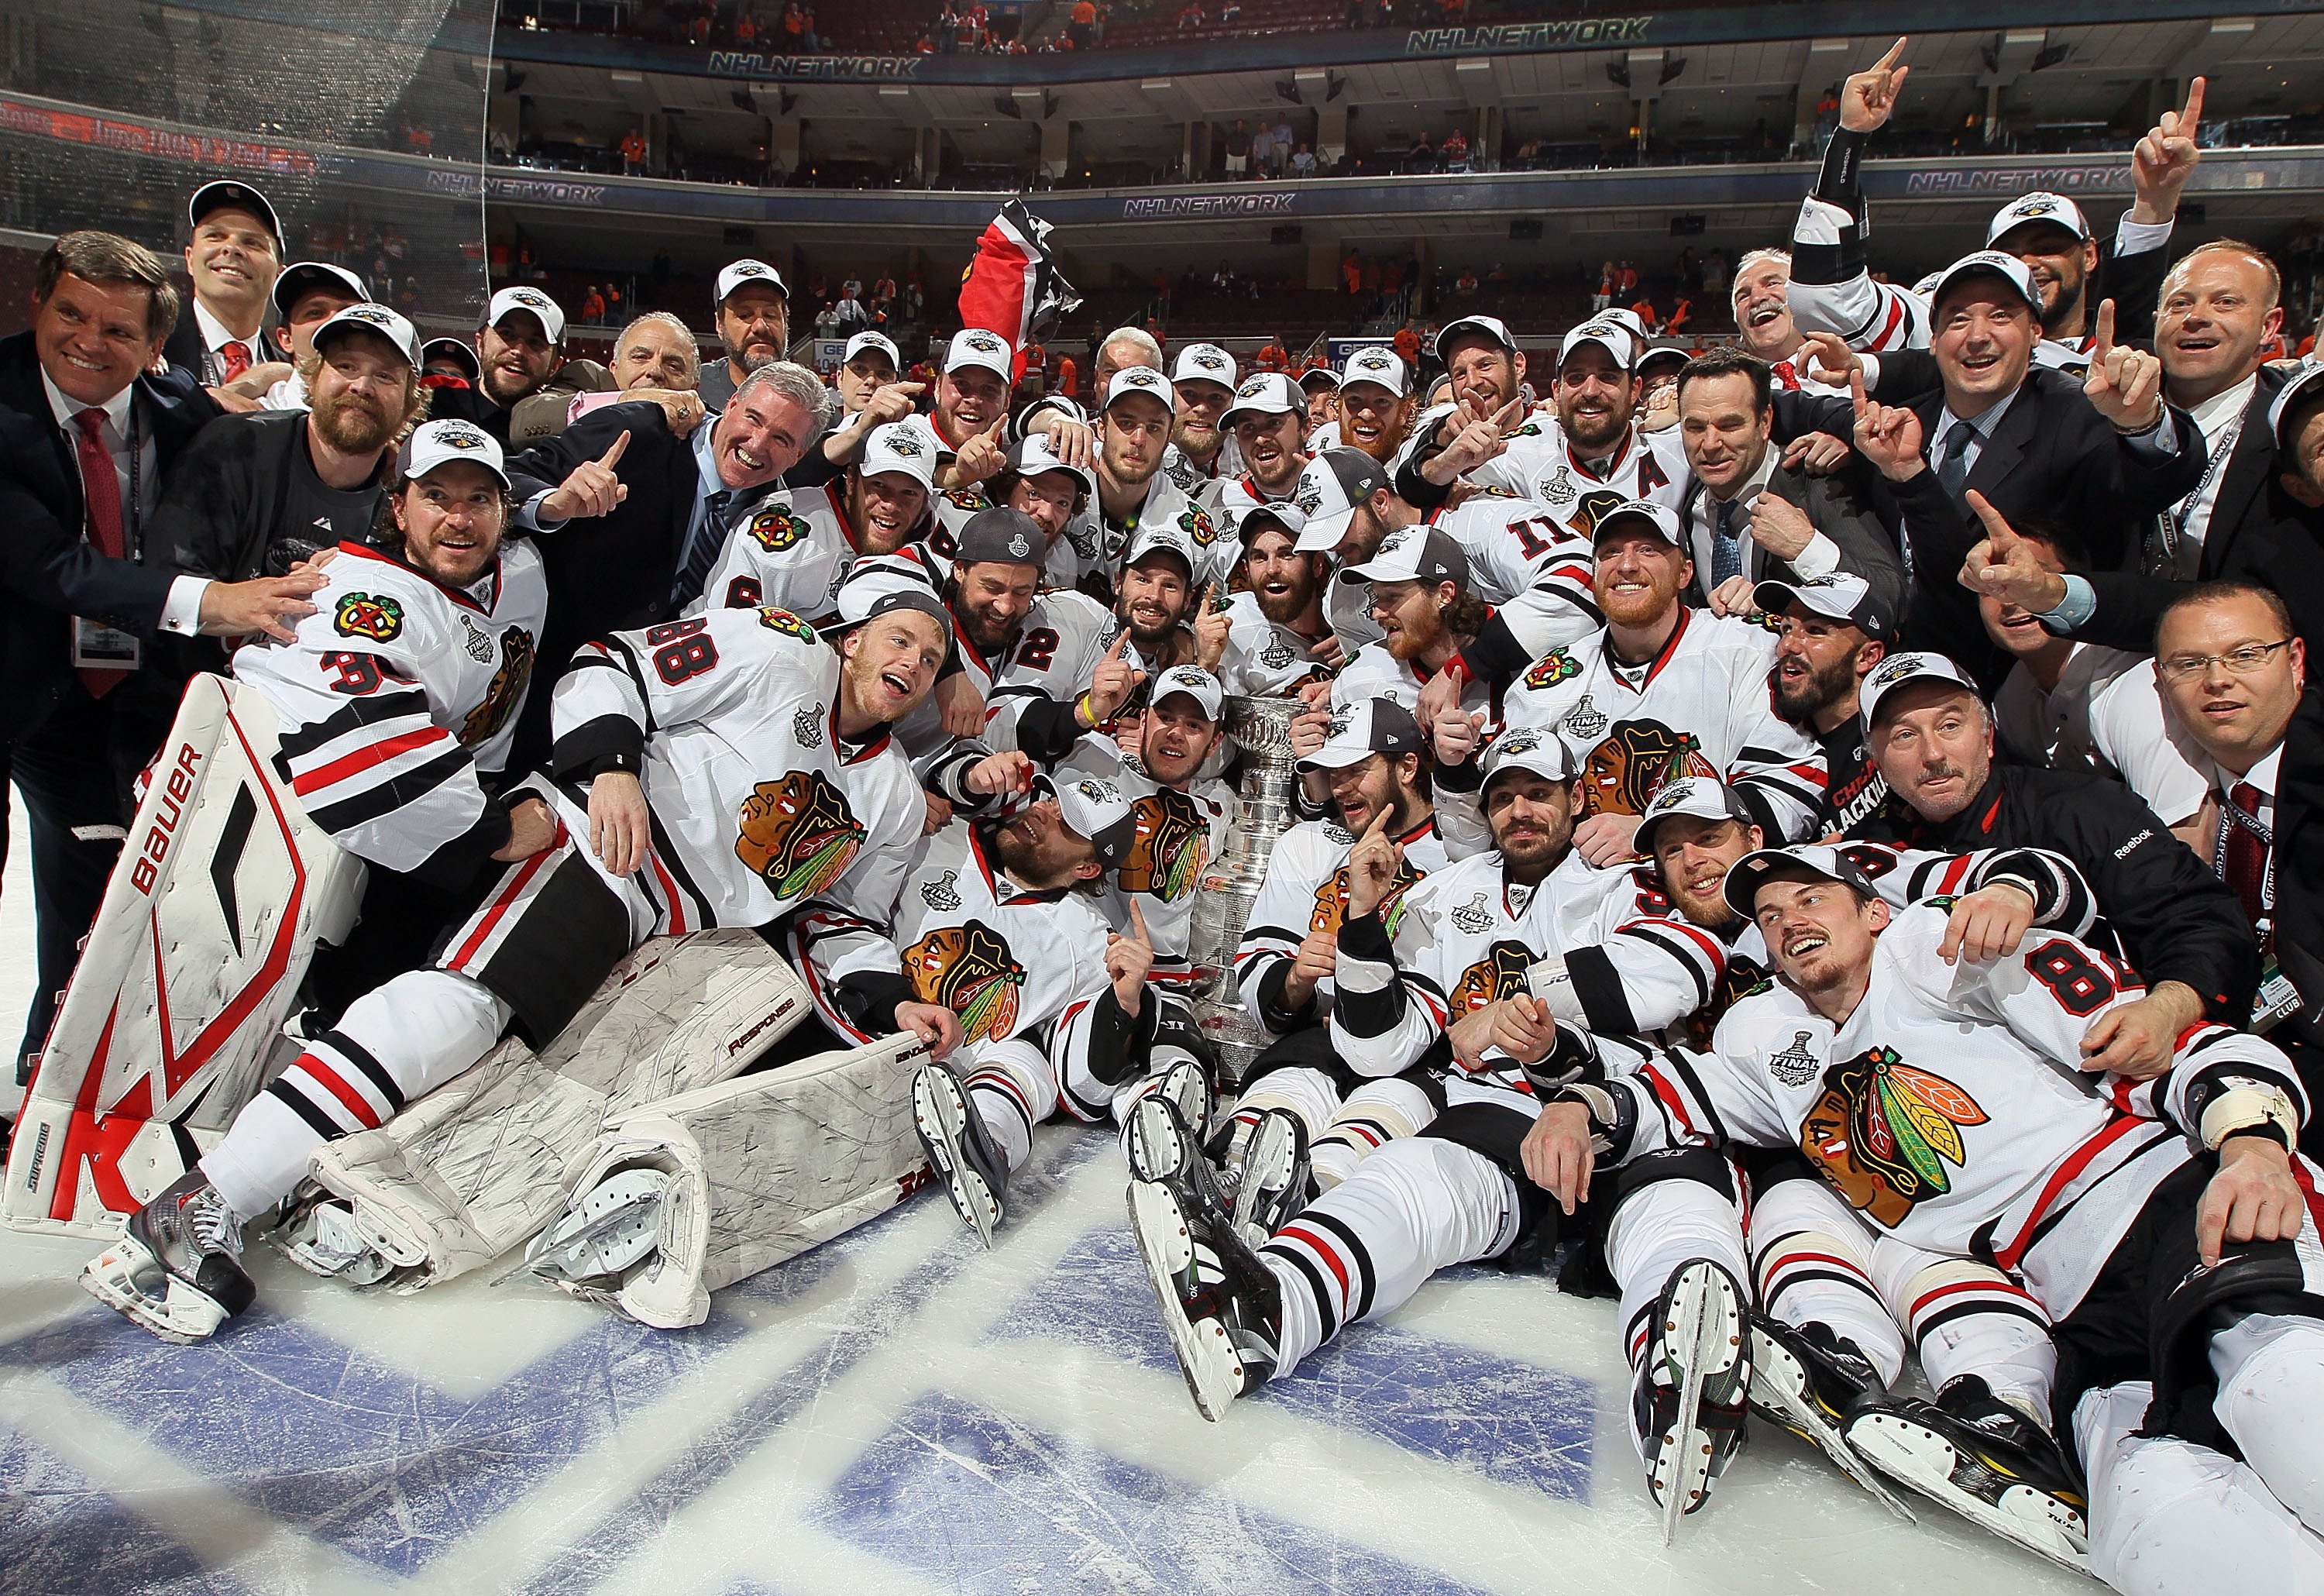 Photo: The Chicago Blackhawks win the 2010 Stanley Cup Playoffs in